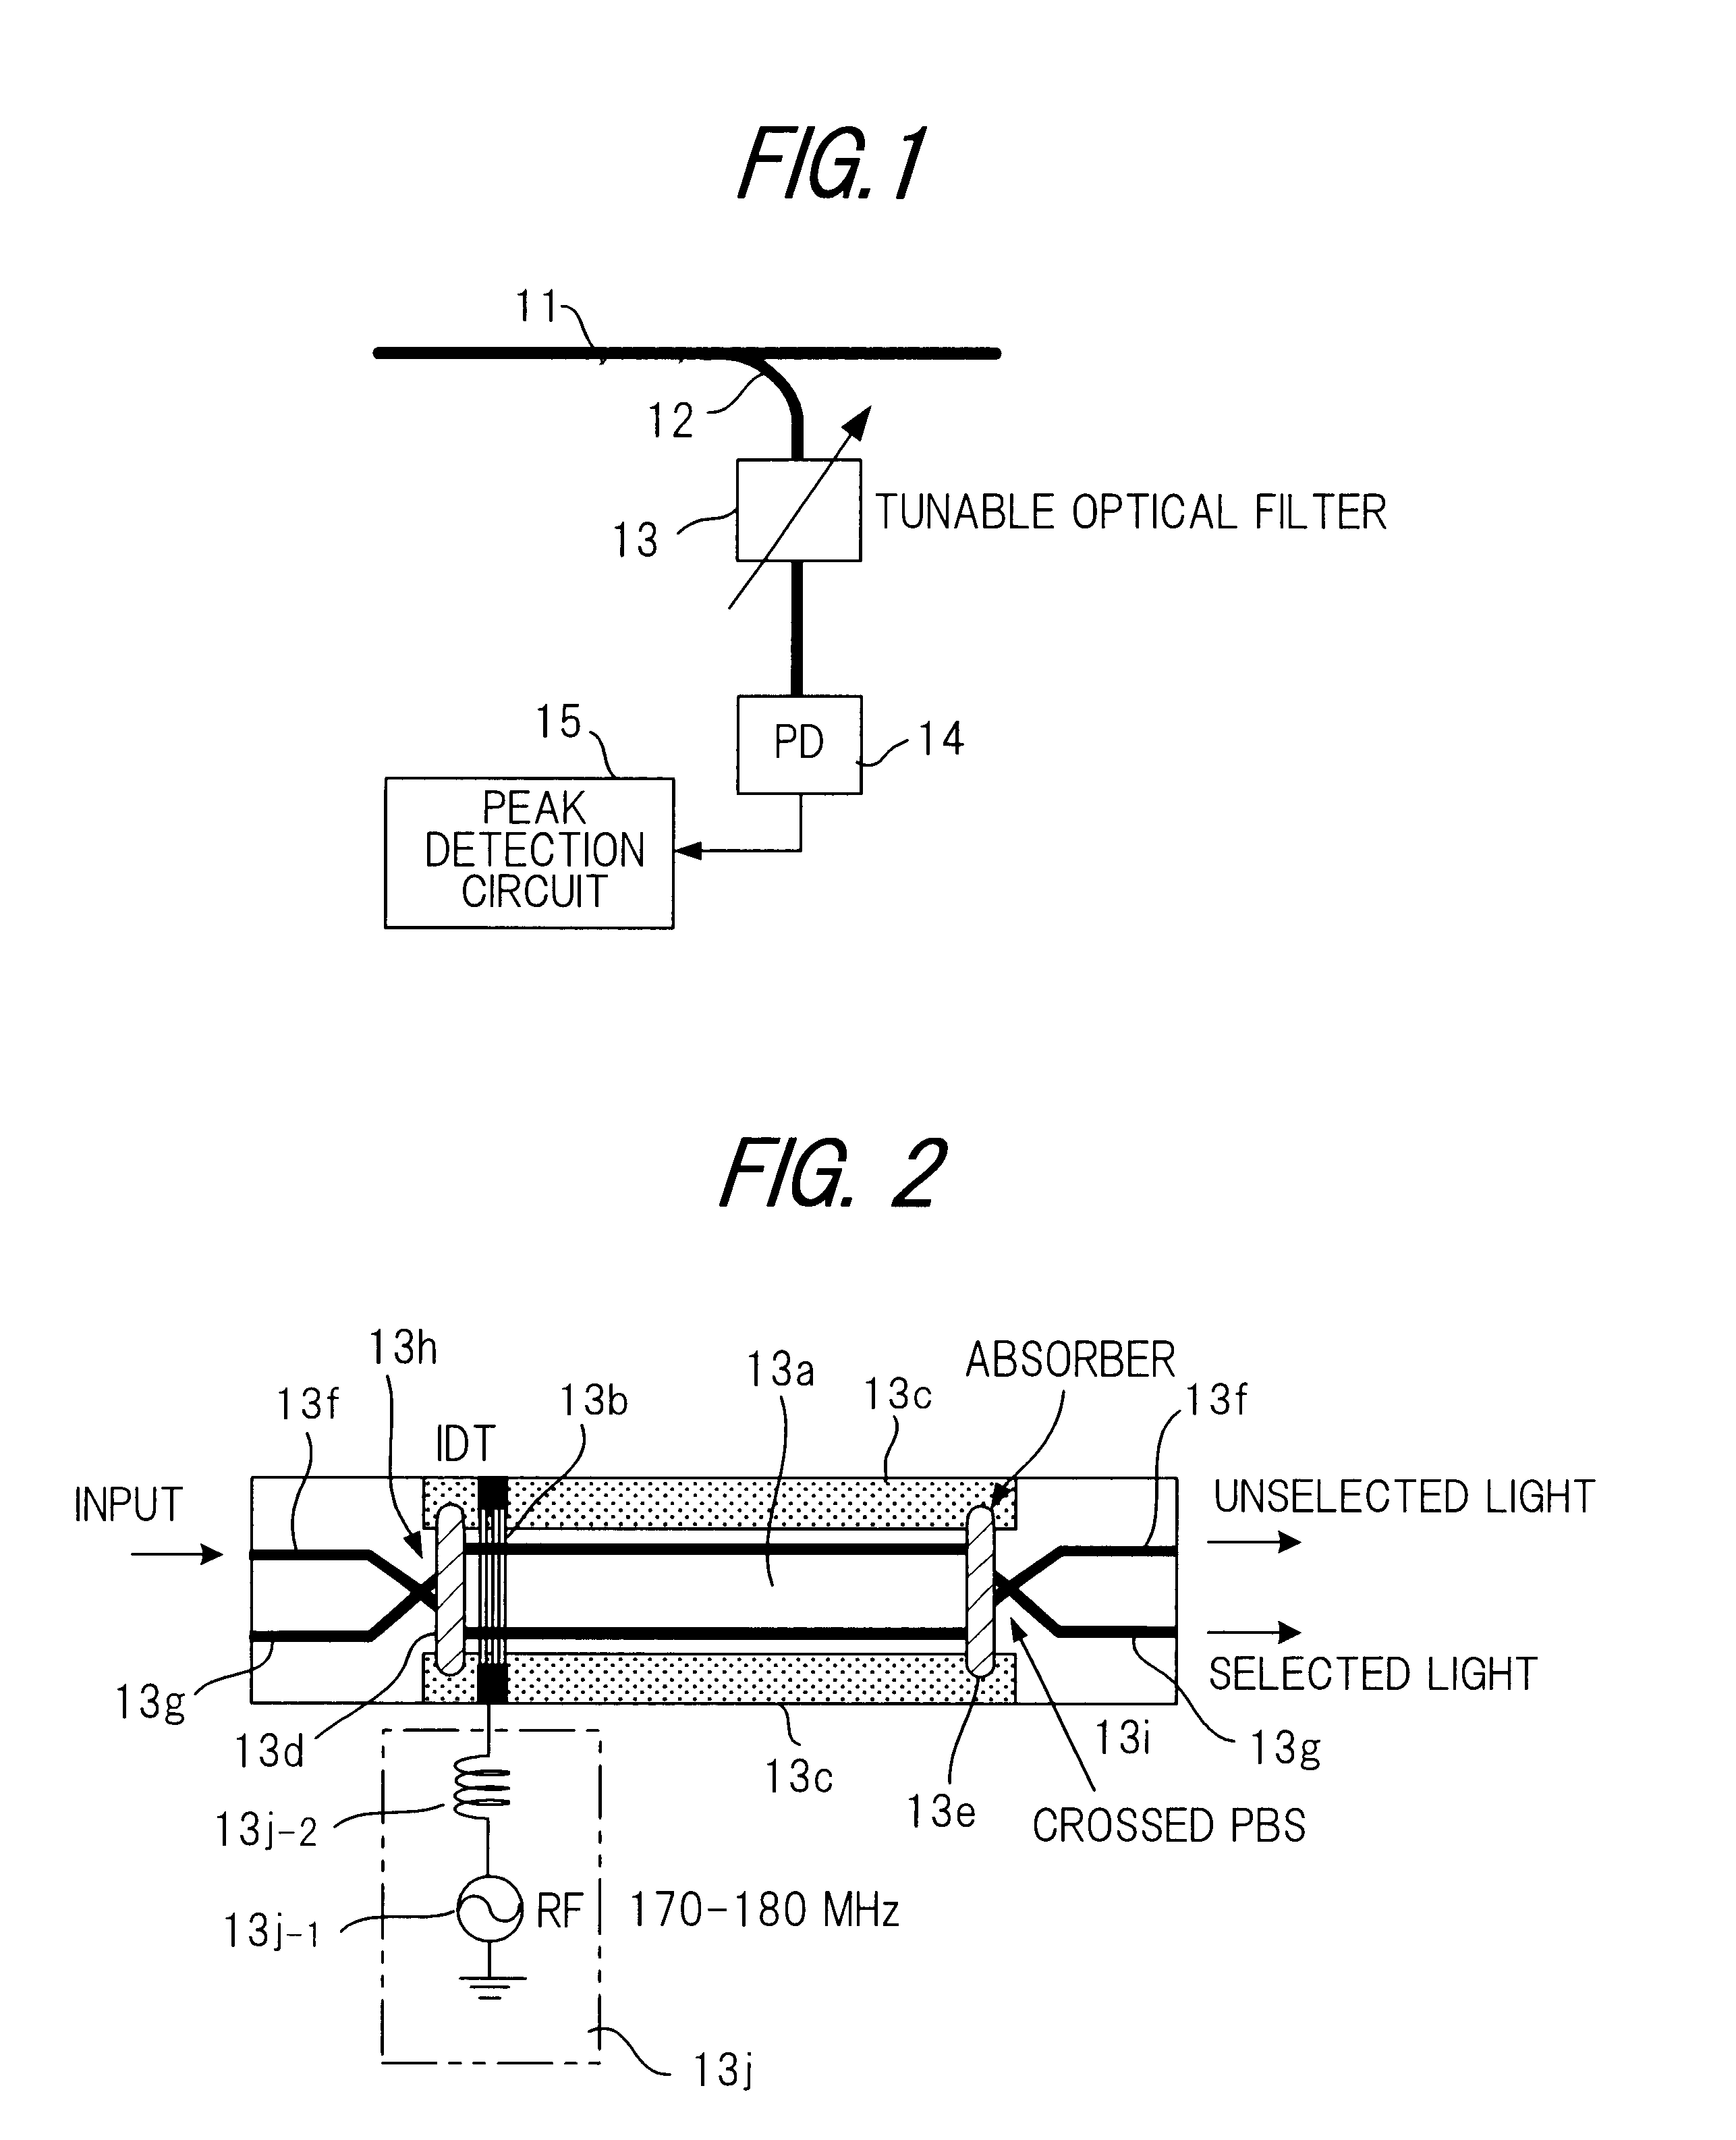 Apparatus for detecting peaks of wavelength-division-multiplexed light, and apparatus for controlling said light